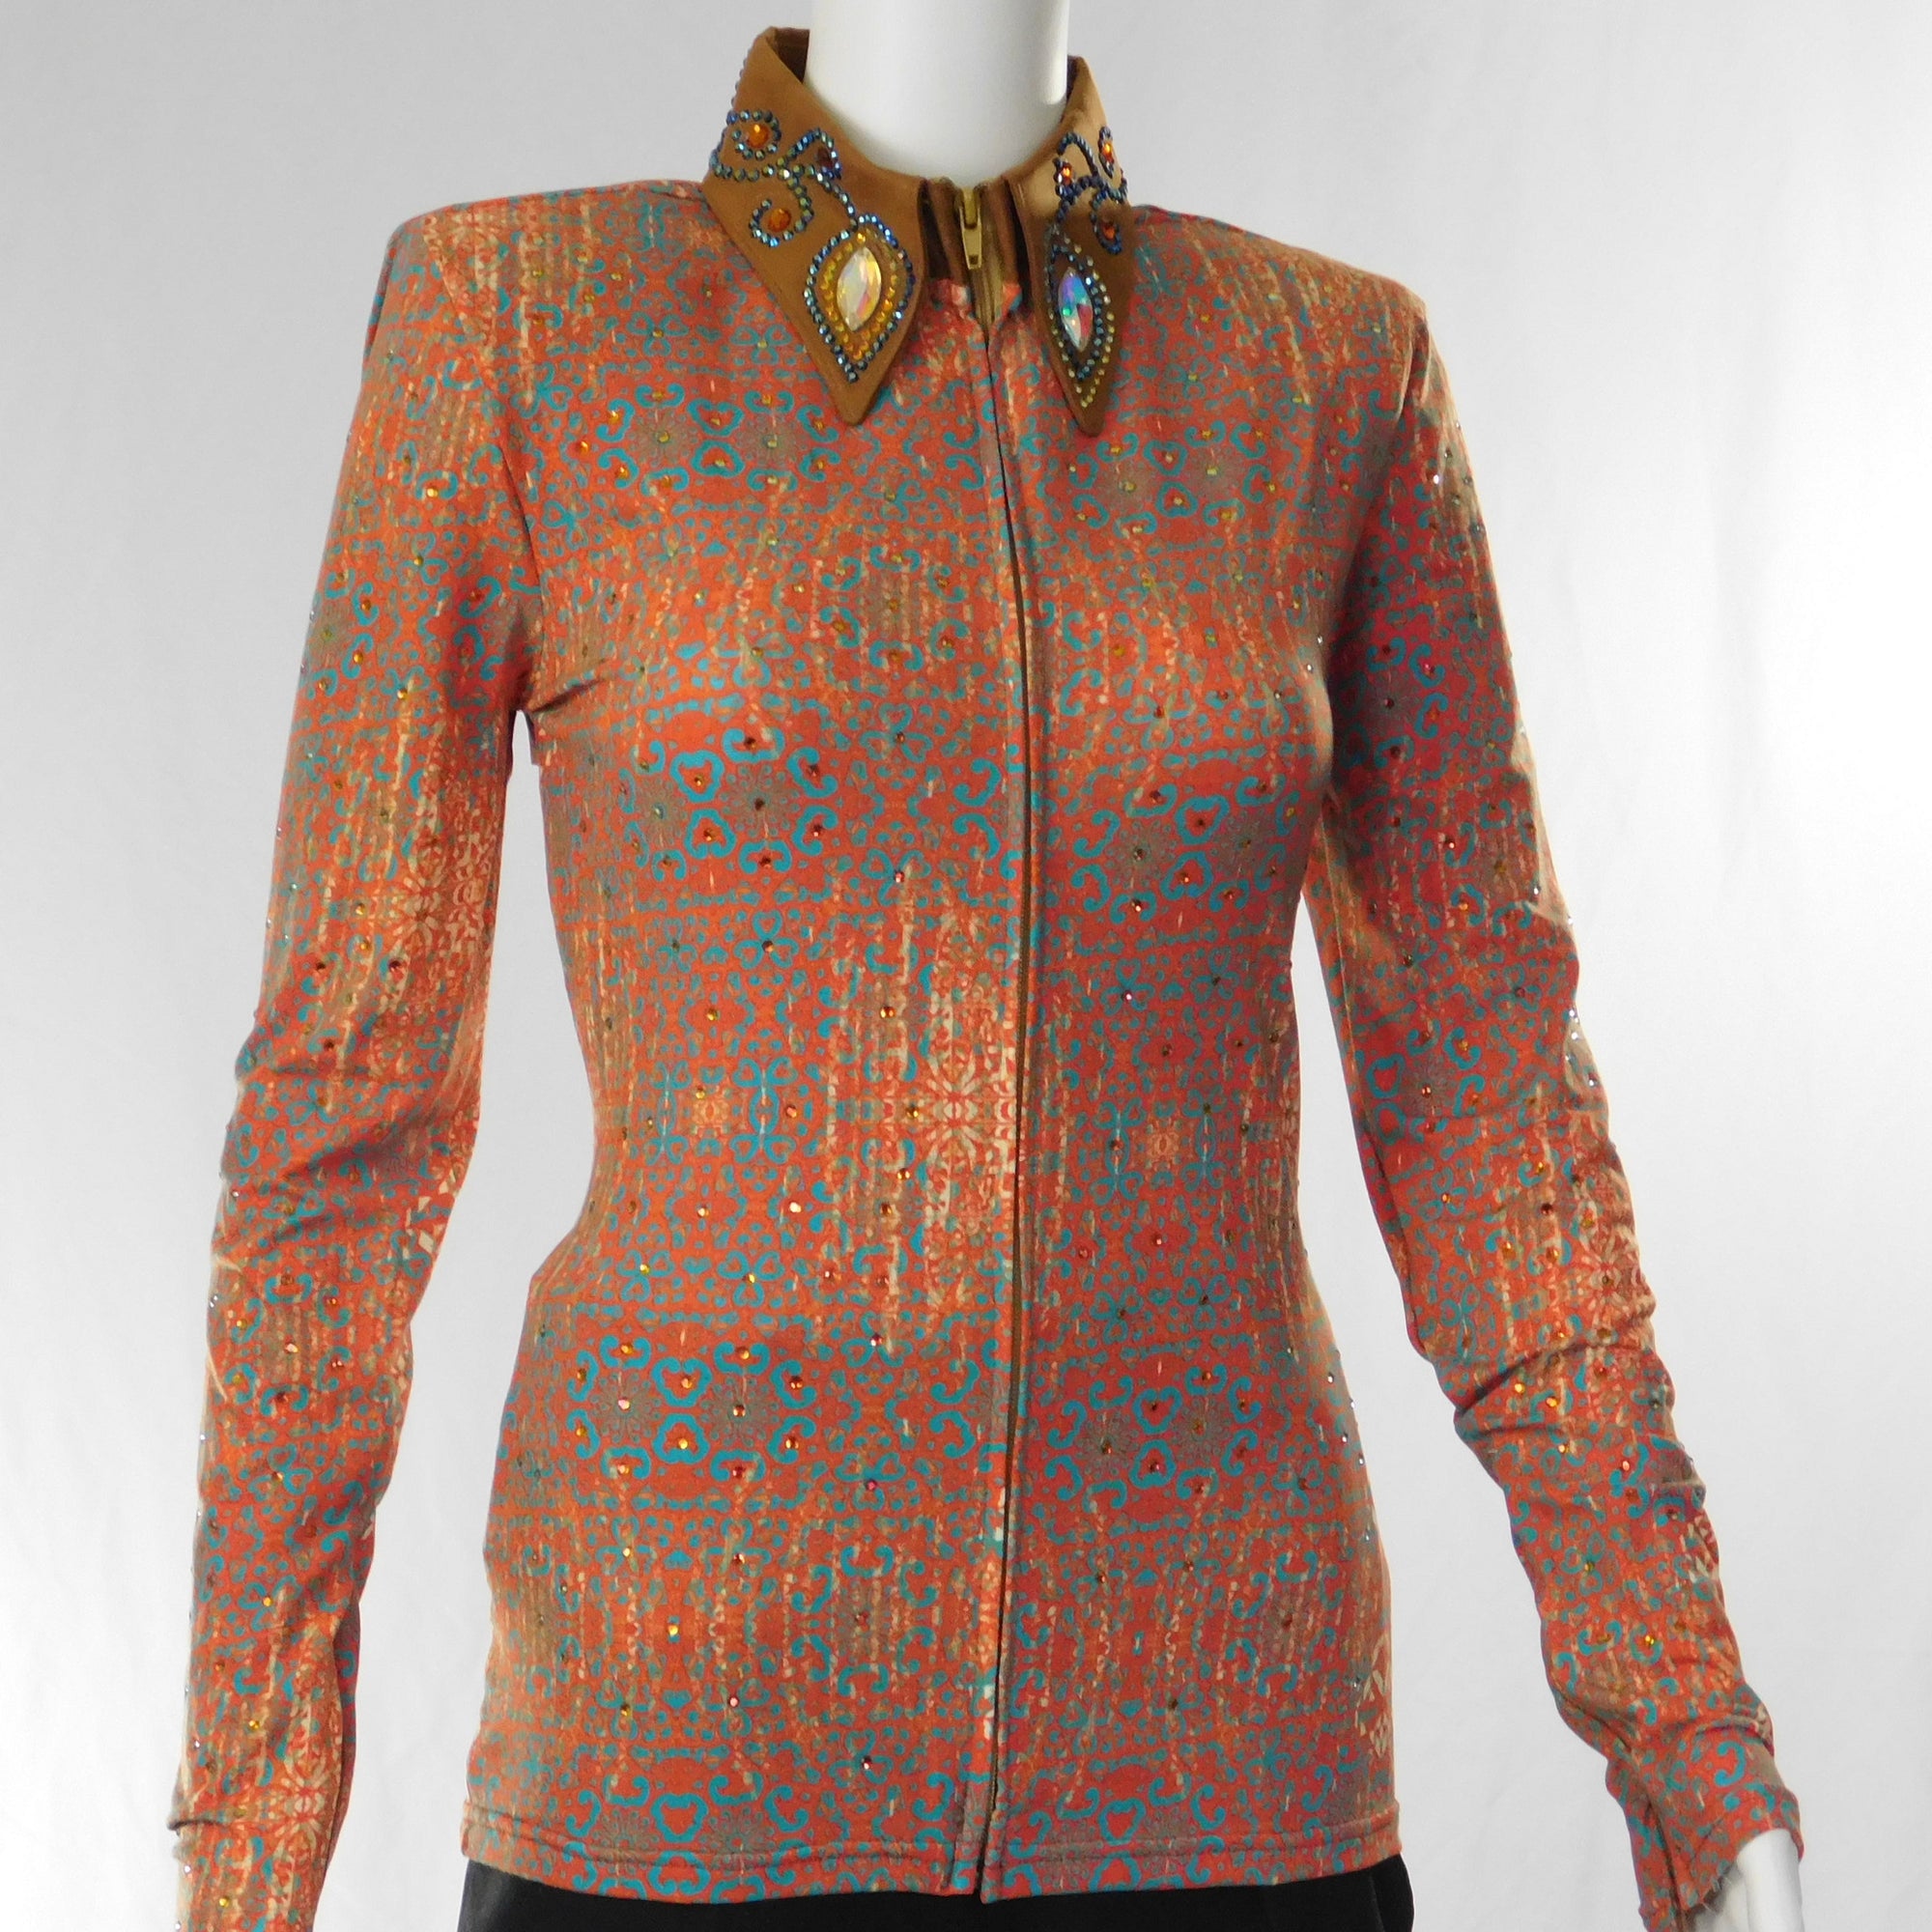 Ladies Western Collection Custom Orange and Teal Floral Kaleadoscope Show Shirt